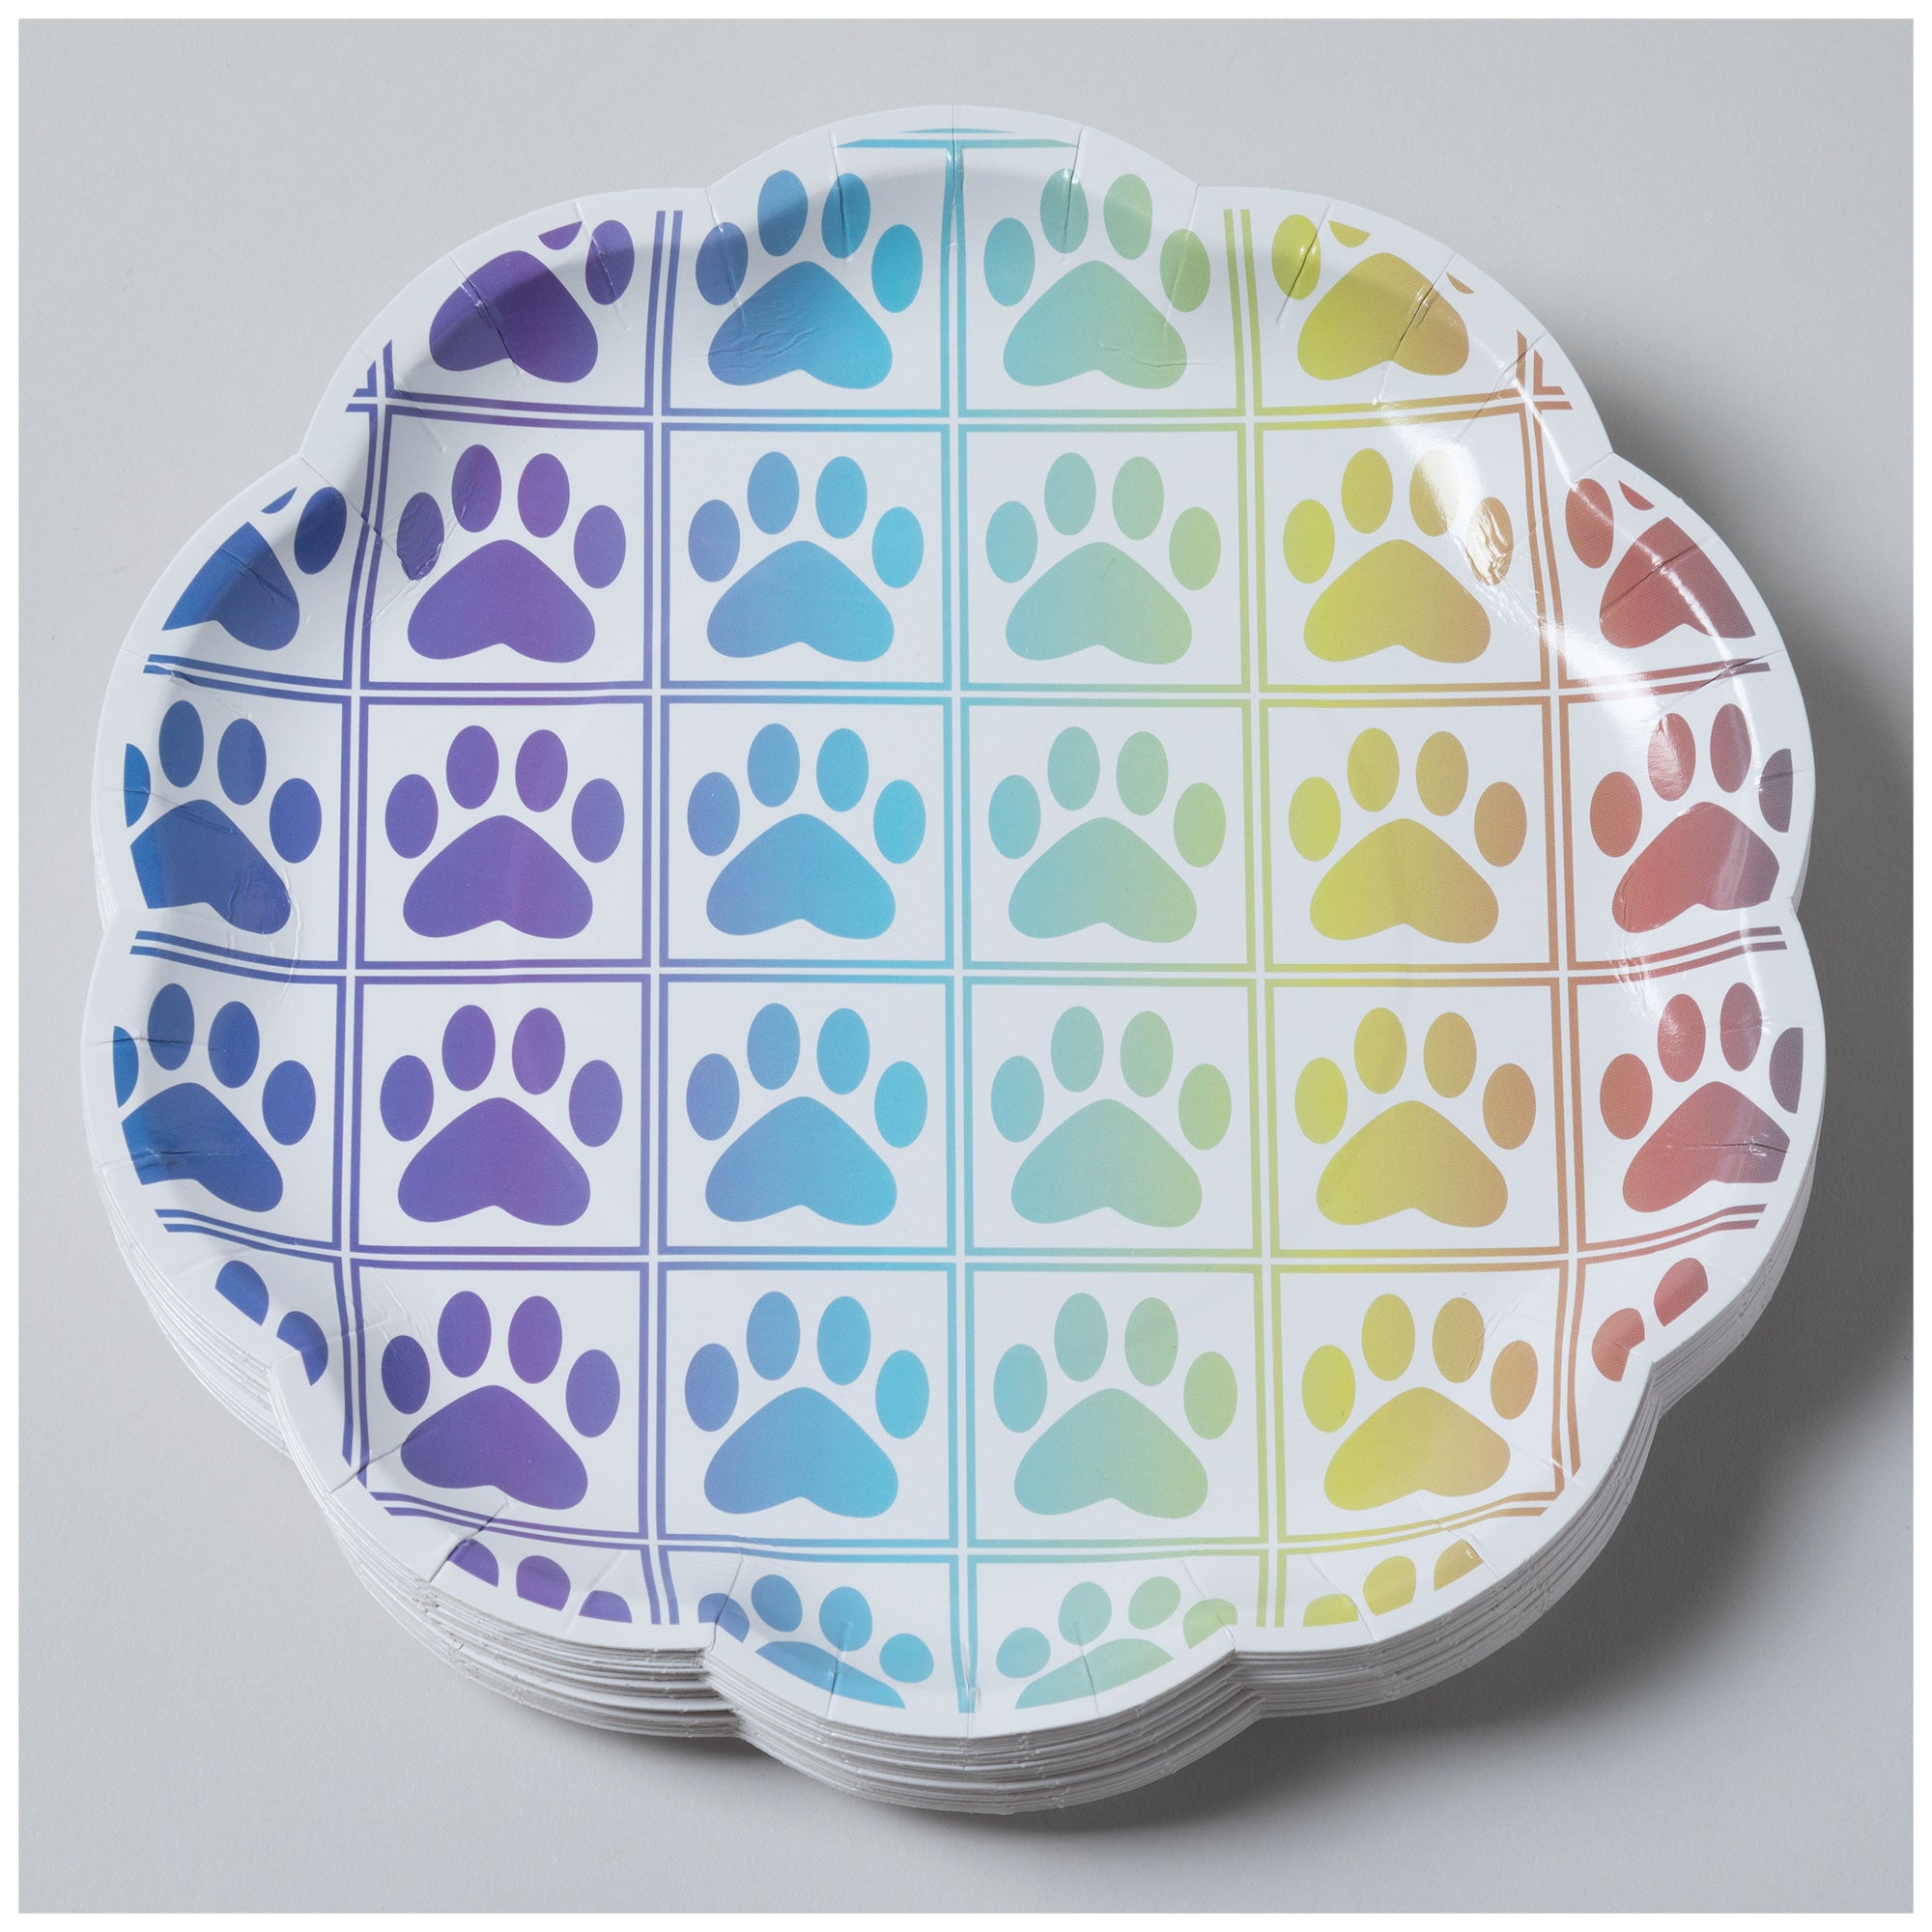 Pawfect Occasion Paper Plates & Napkins - Rainbow Checkered Paws - Plates Only